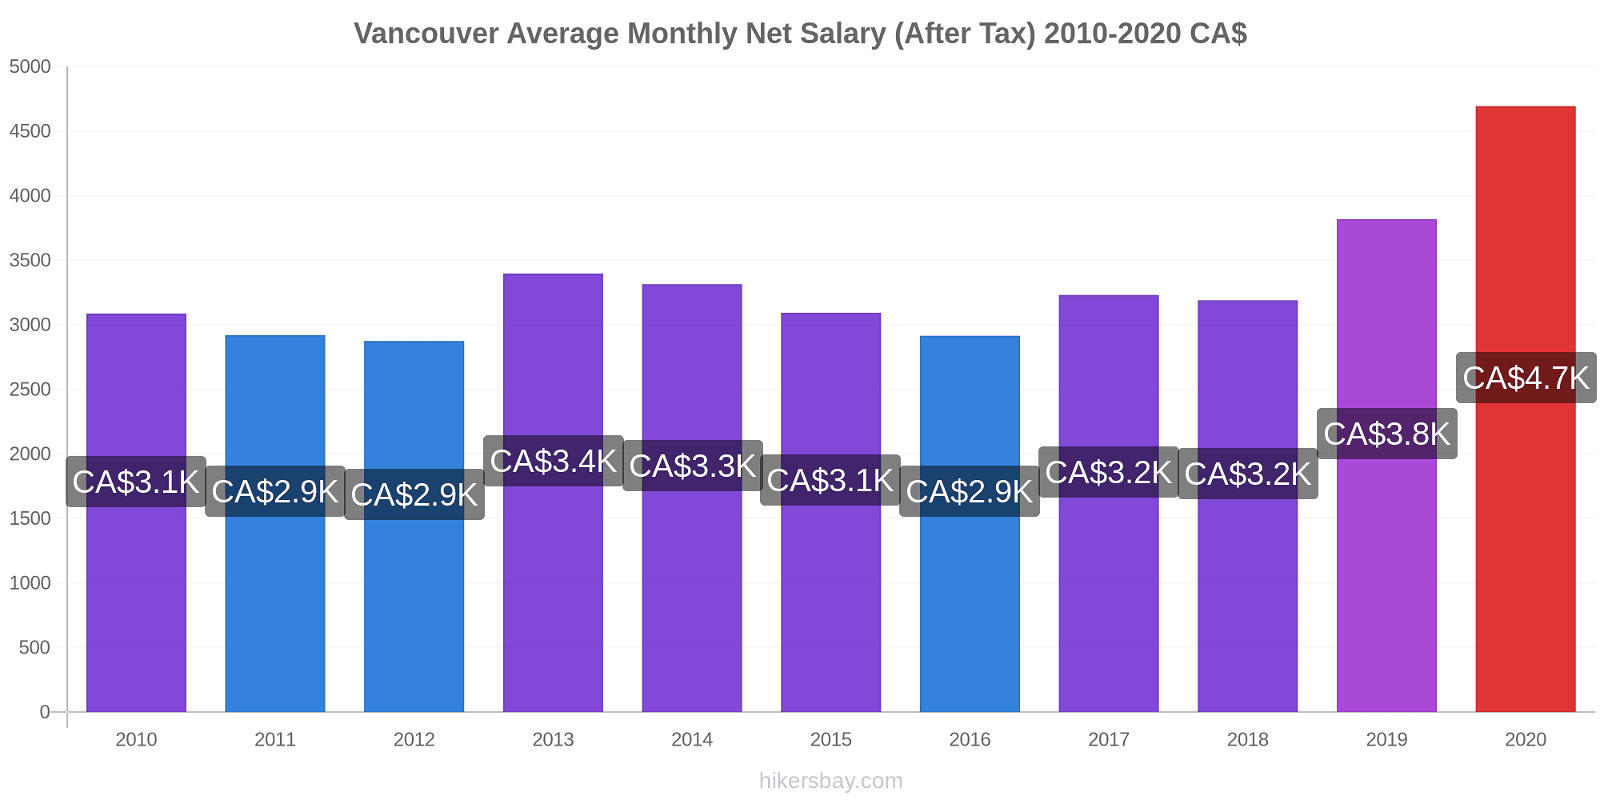 Vancouver price changes Average Monthly Net Salary (After Tax) hikersbay.com